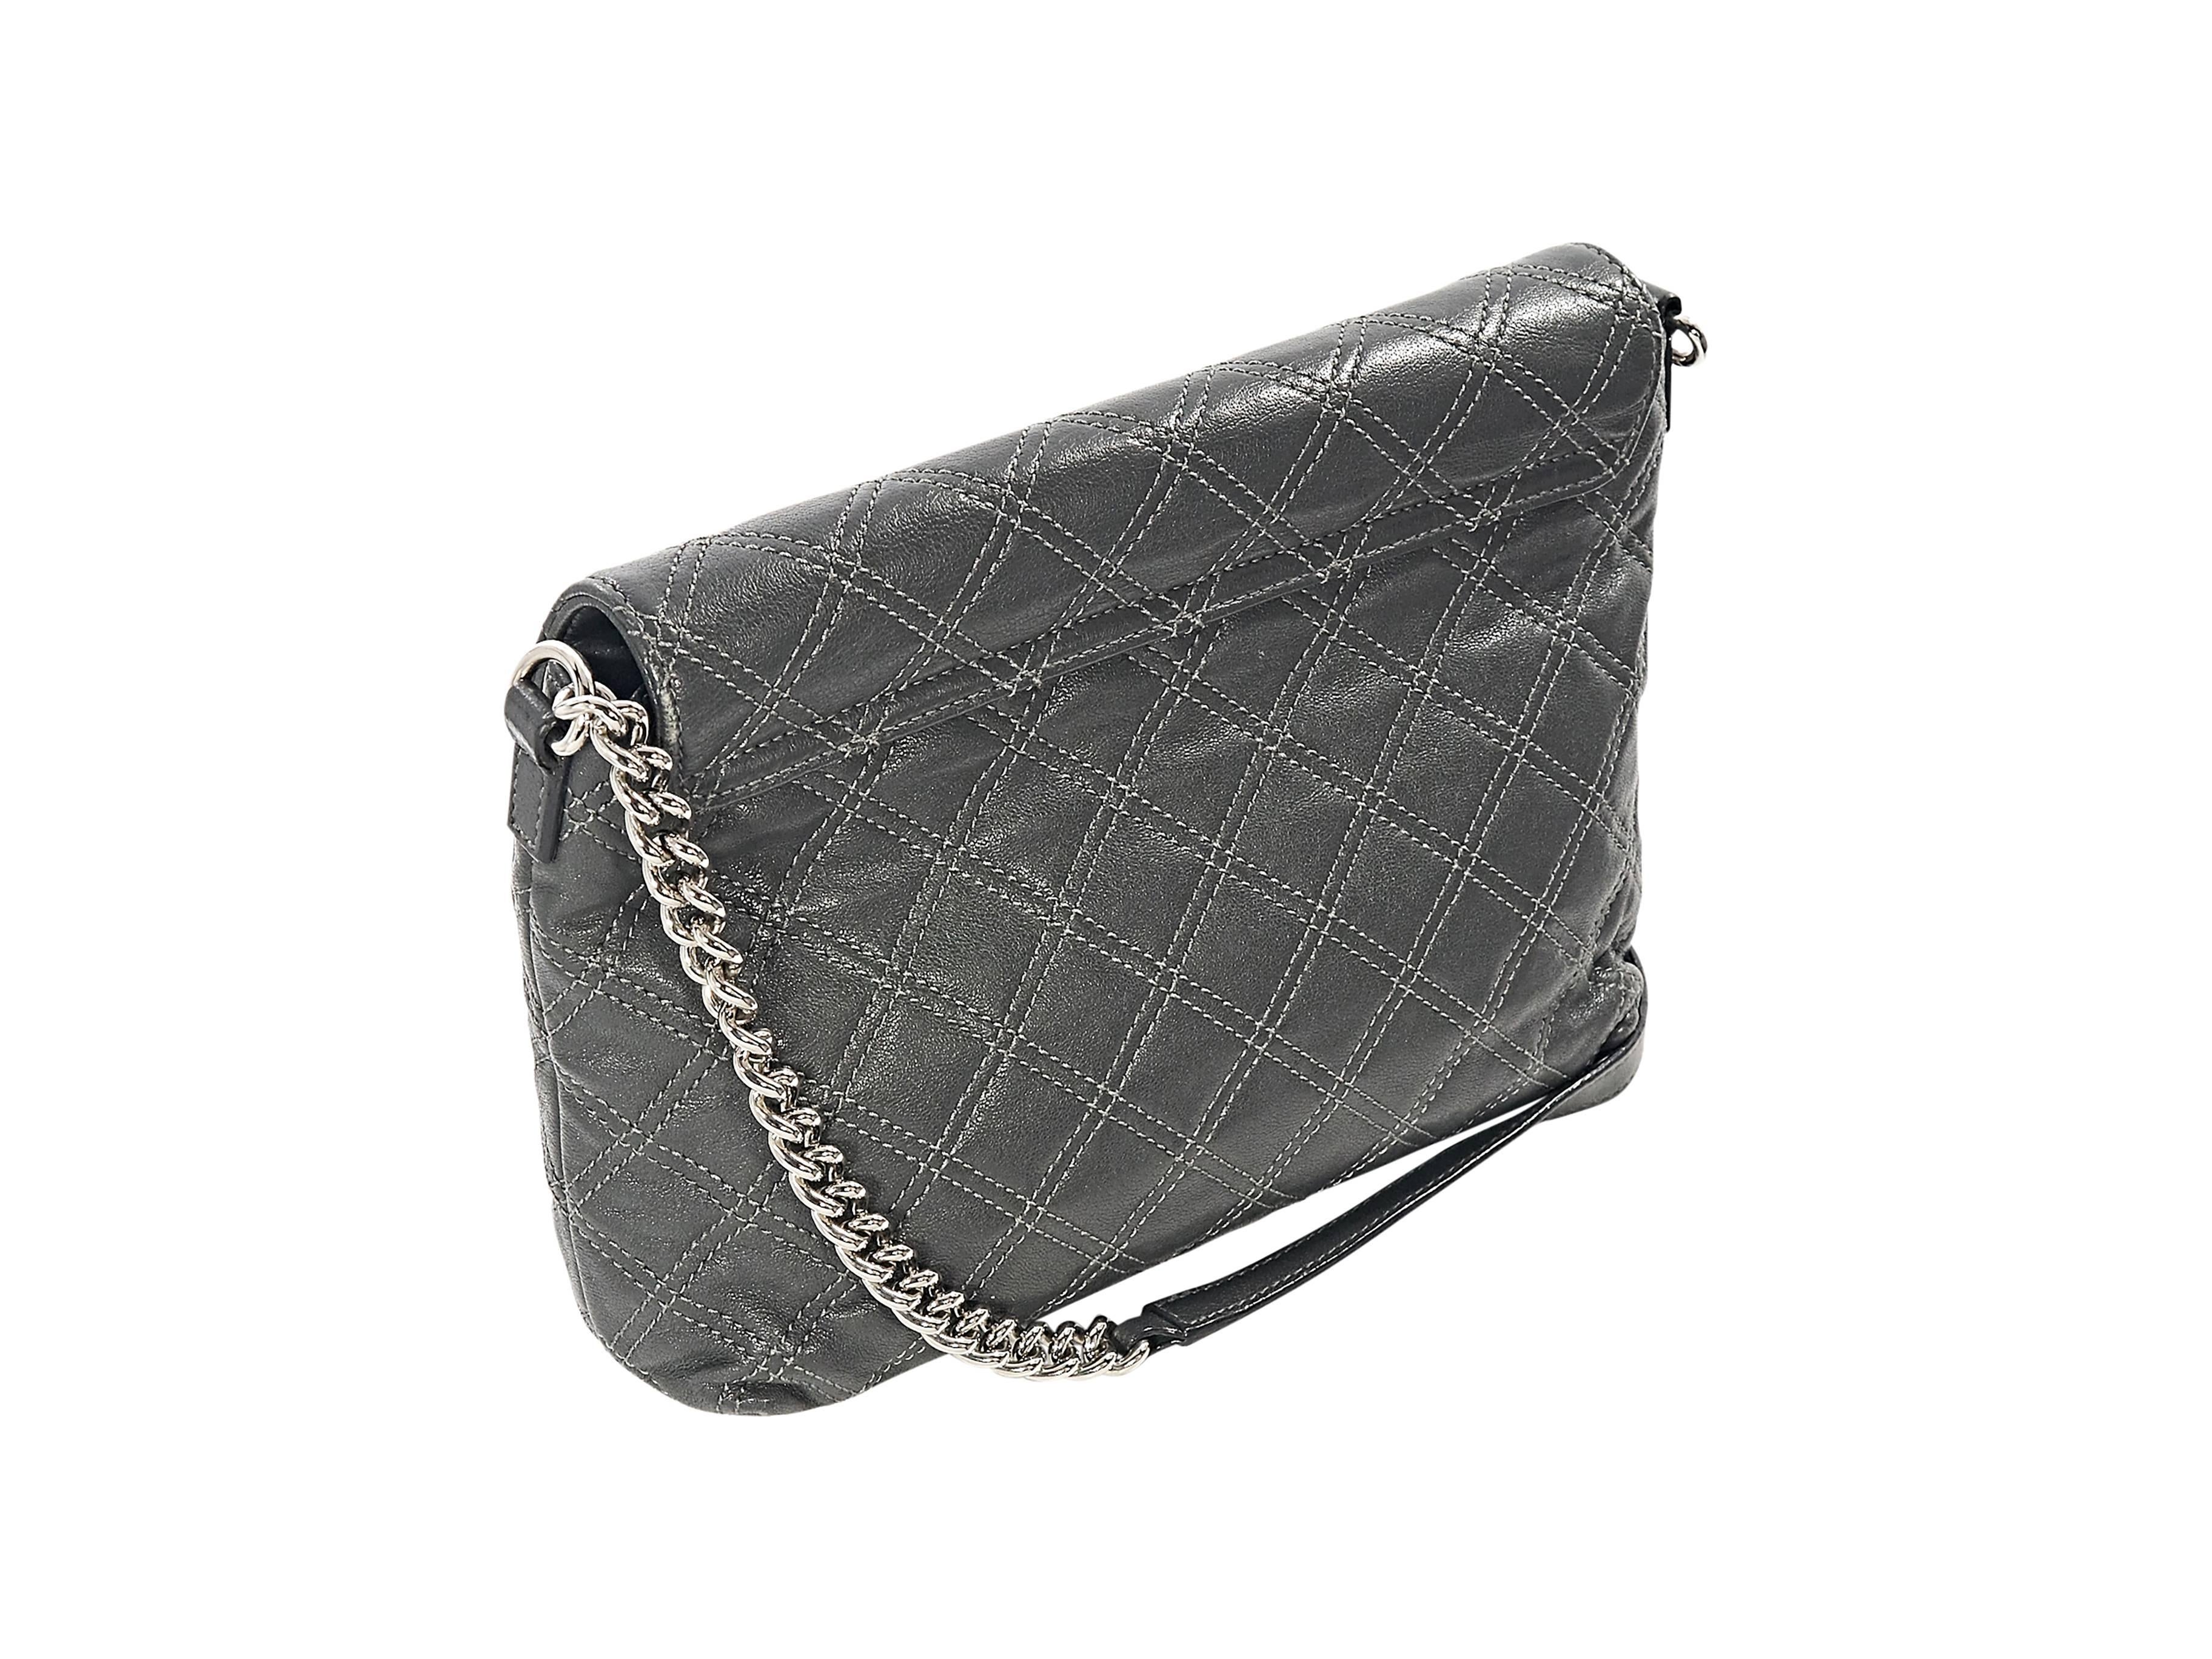 Product details:  ﻿Grey quilted leather shoulder bag by Marc Jacobs.  Leather and chain shoulder strap.  Front flap accented with a faux lock.  Lined interior with inner zip pocket and two slide pockets.  Silvertone hardware.  Dust bag included. 